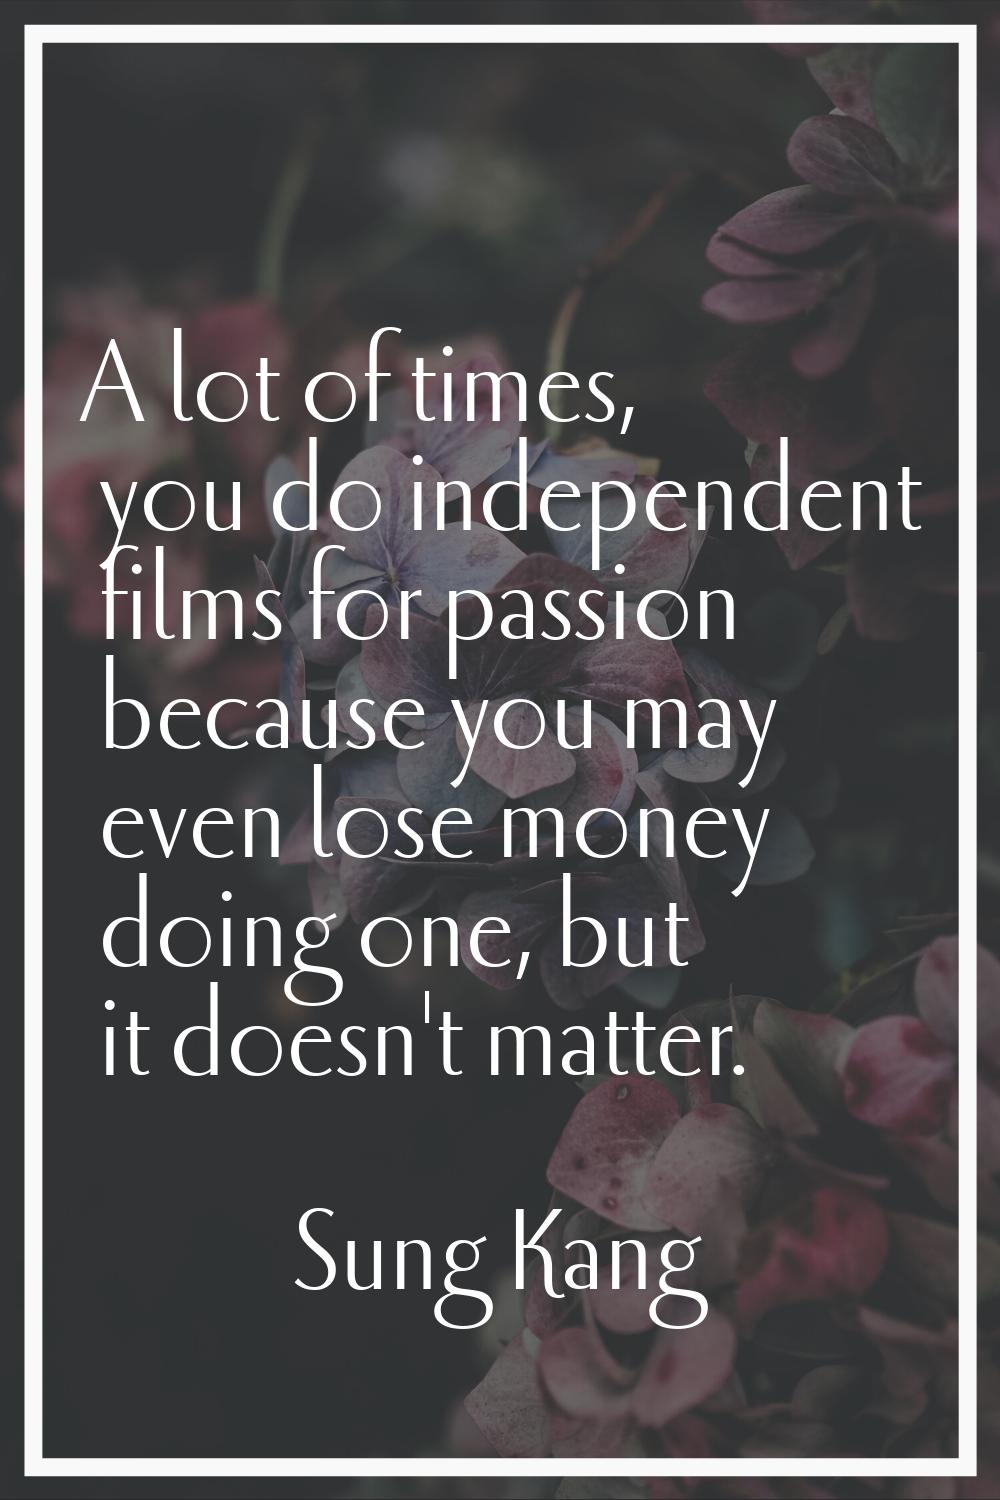 A lot of times, you do independent films for passion because you may even lose money doing one, but